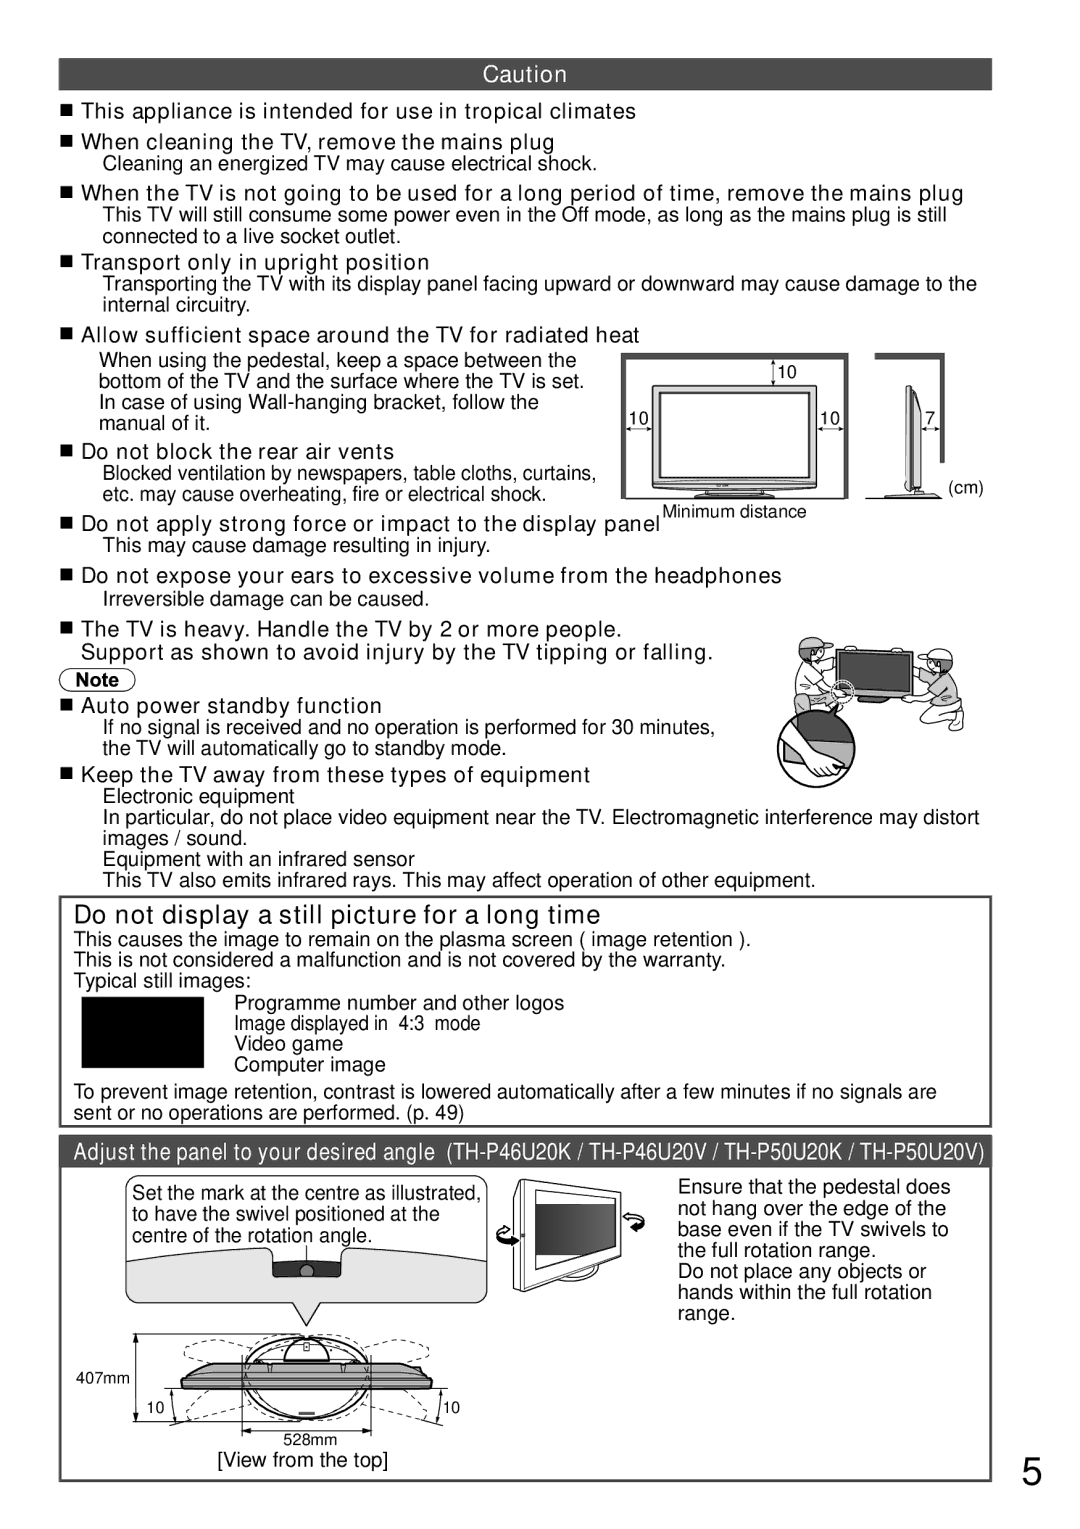 Panasonic TH-P50U20P, TH-P50U20M, TH-P50U20K, TH-P46U20R, TH-P46U20M manual Do not block the rear air vents, View from the top 